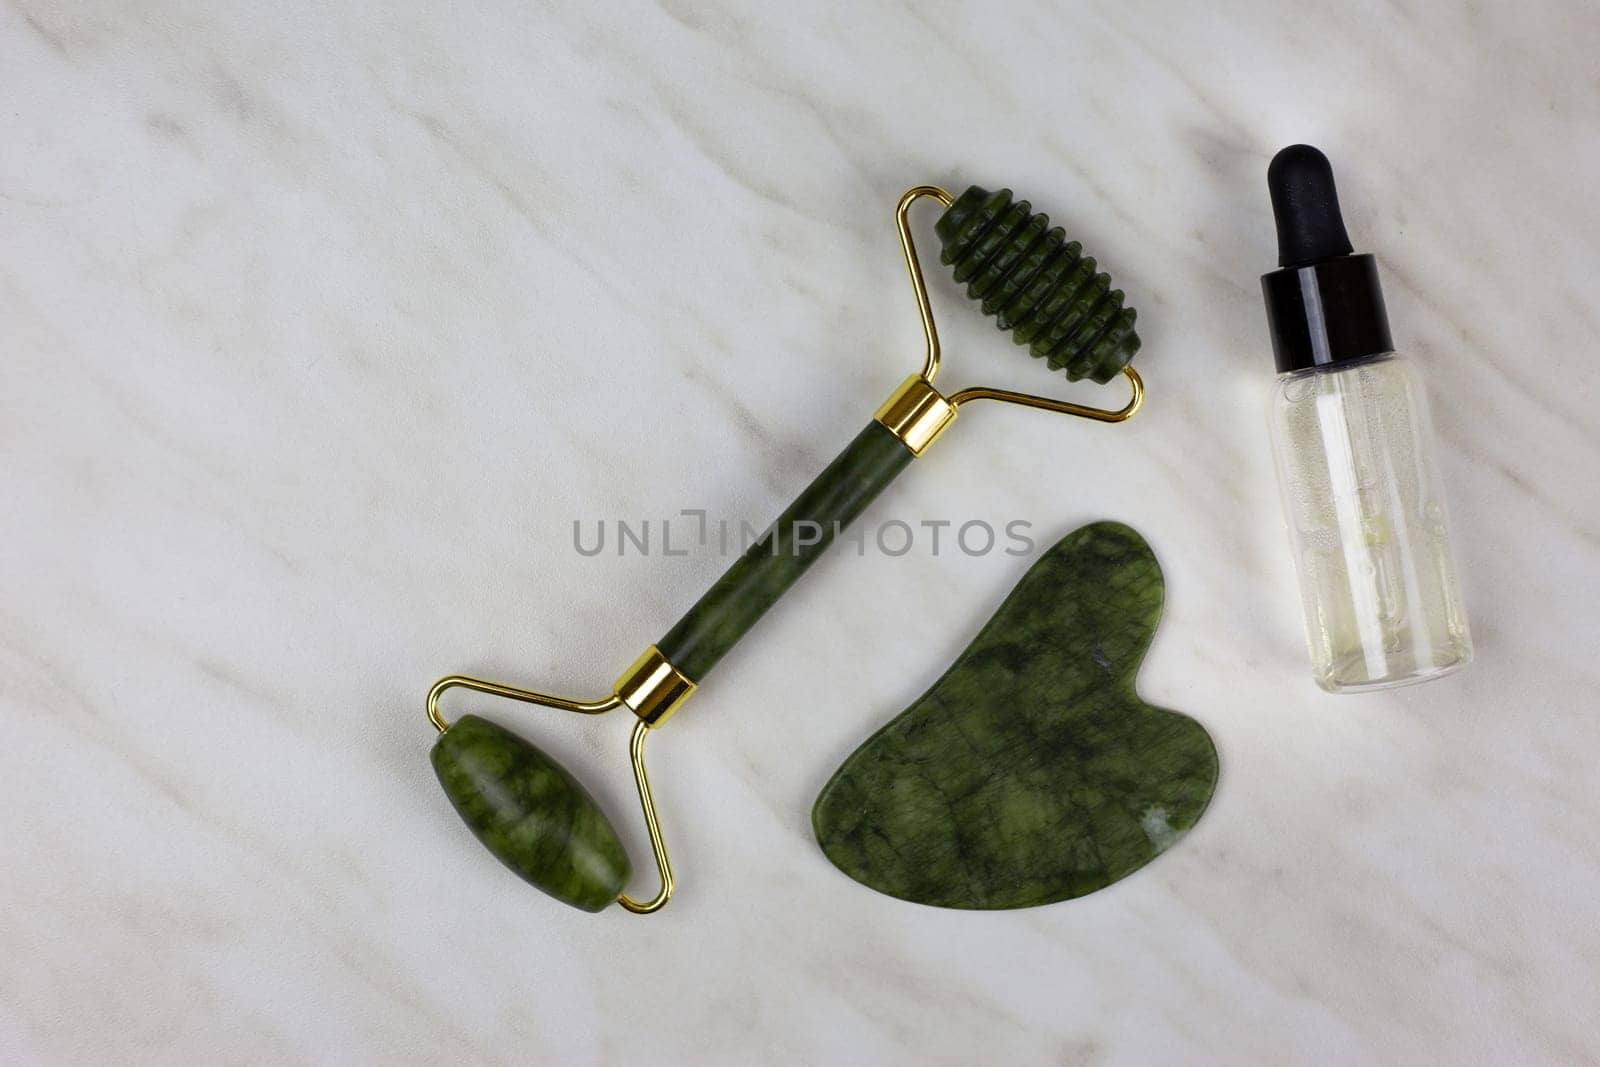 Facial massage and skin care set with special gua sha scraper, moisturizing oil and wrinkle smoothing stone roller lies on white table